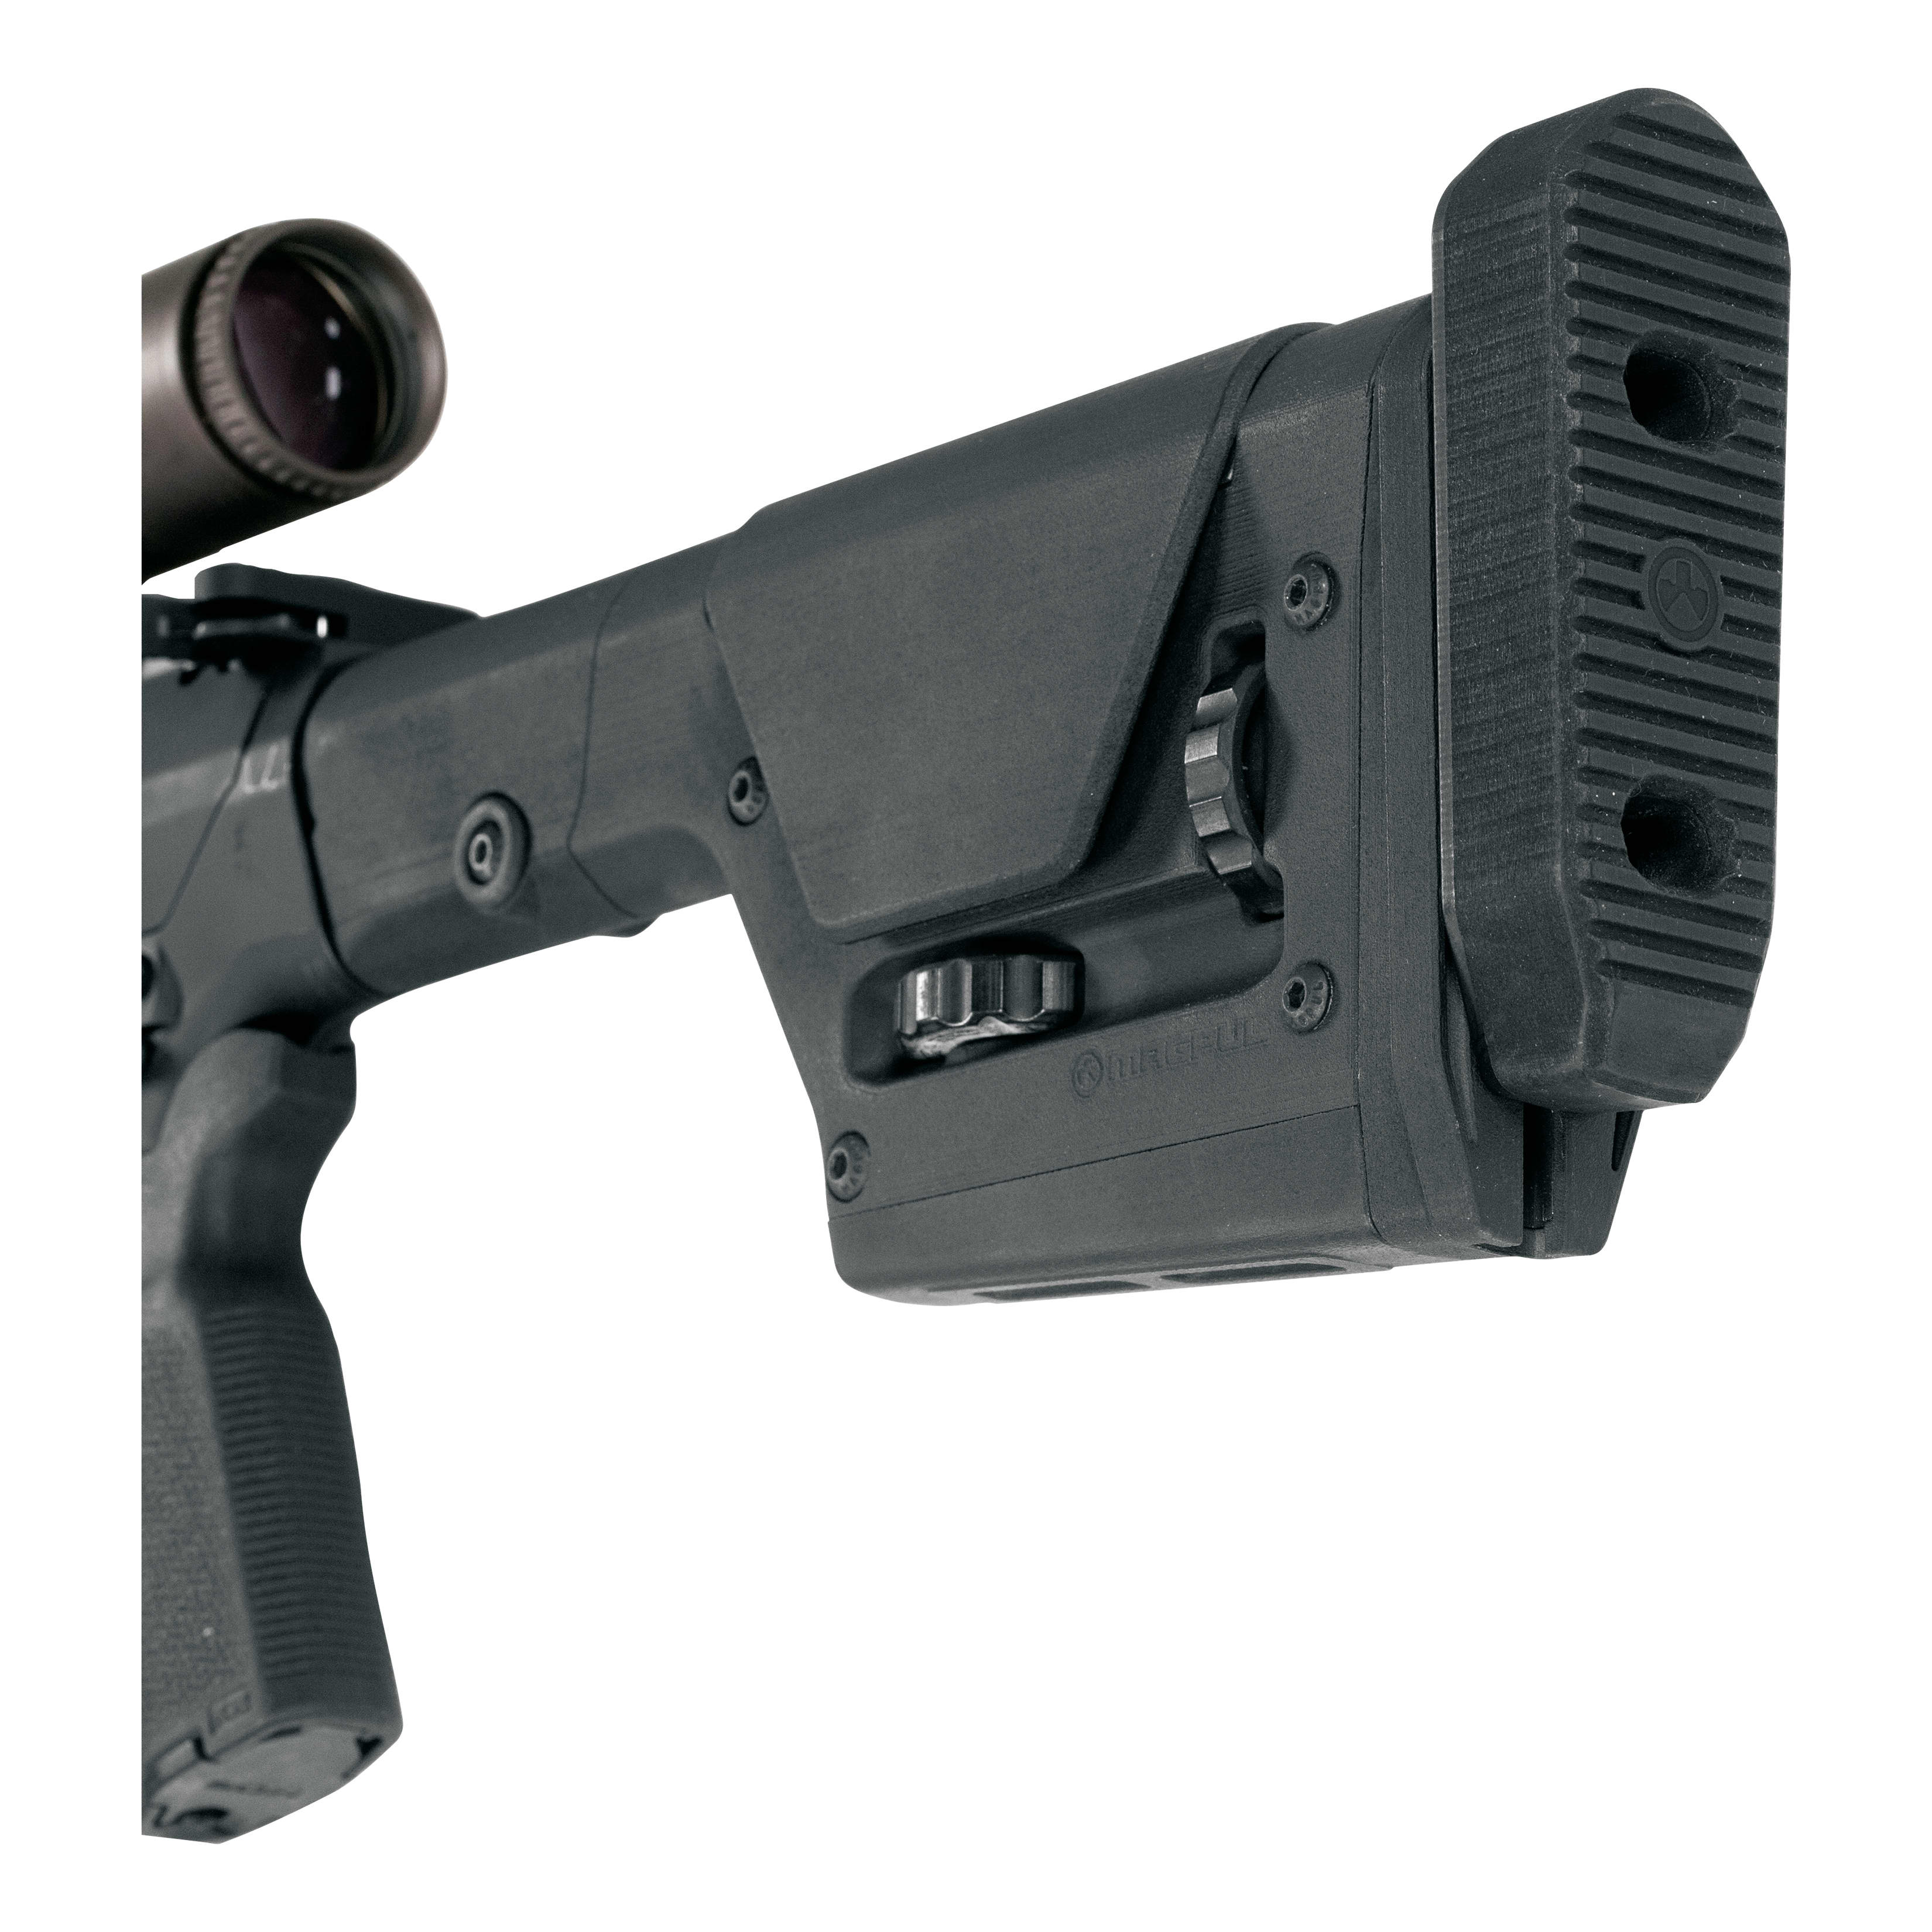 Magpul PRS Gen 3 Precision Adjustable Stock - Adjustable For Both Cant and Height